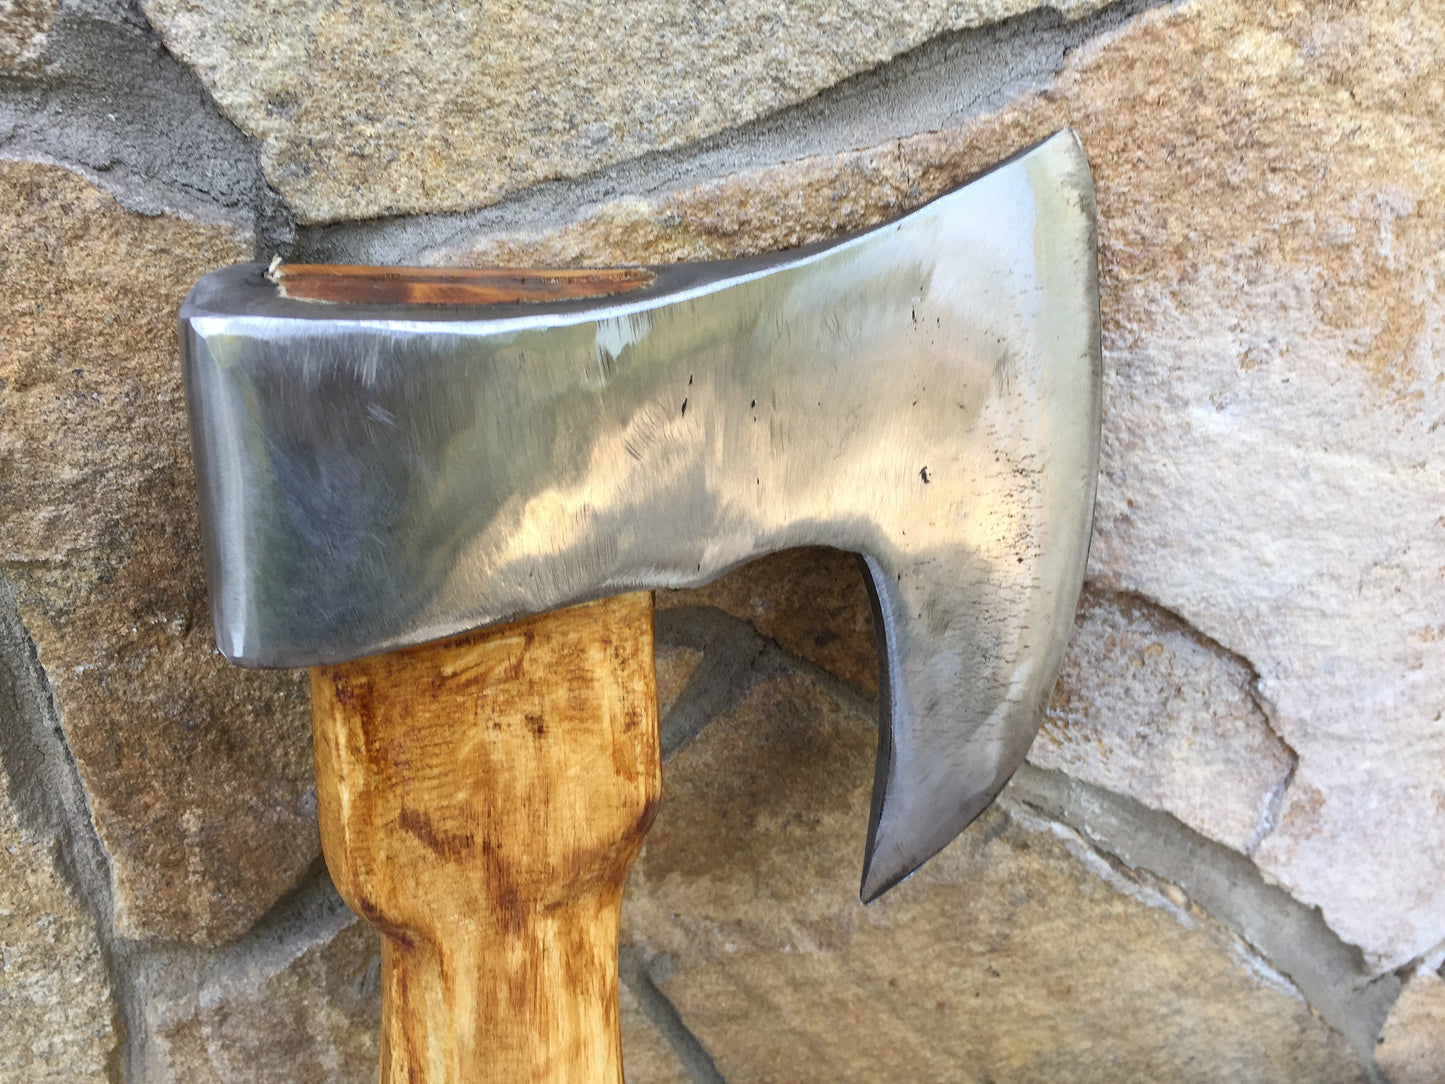 Viking axe, mens gifts, medieval axe, tomahawk, camping, hiking, hunting, iron gift for him, chopping axe, gifts for men, manly iron gifts